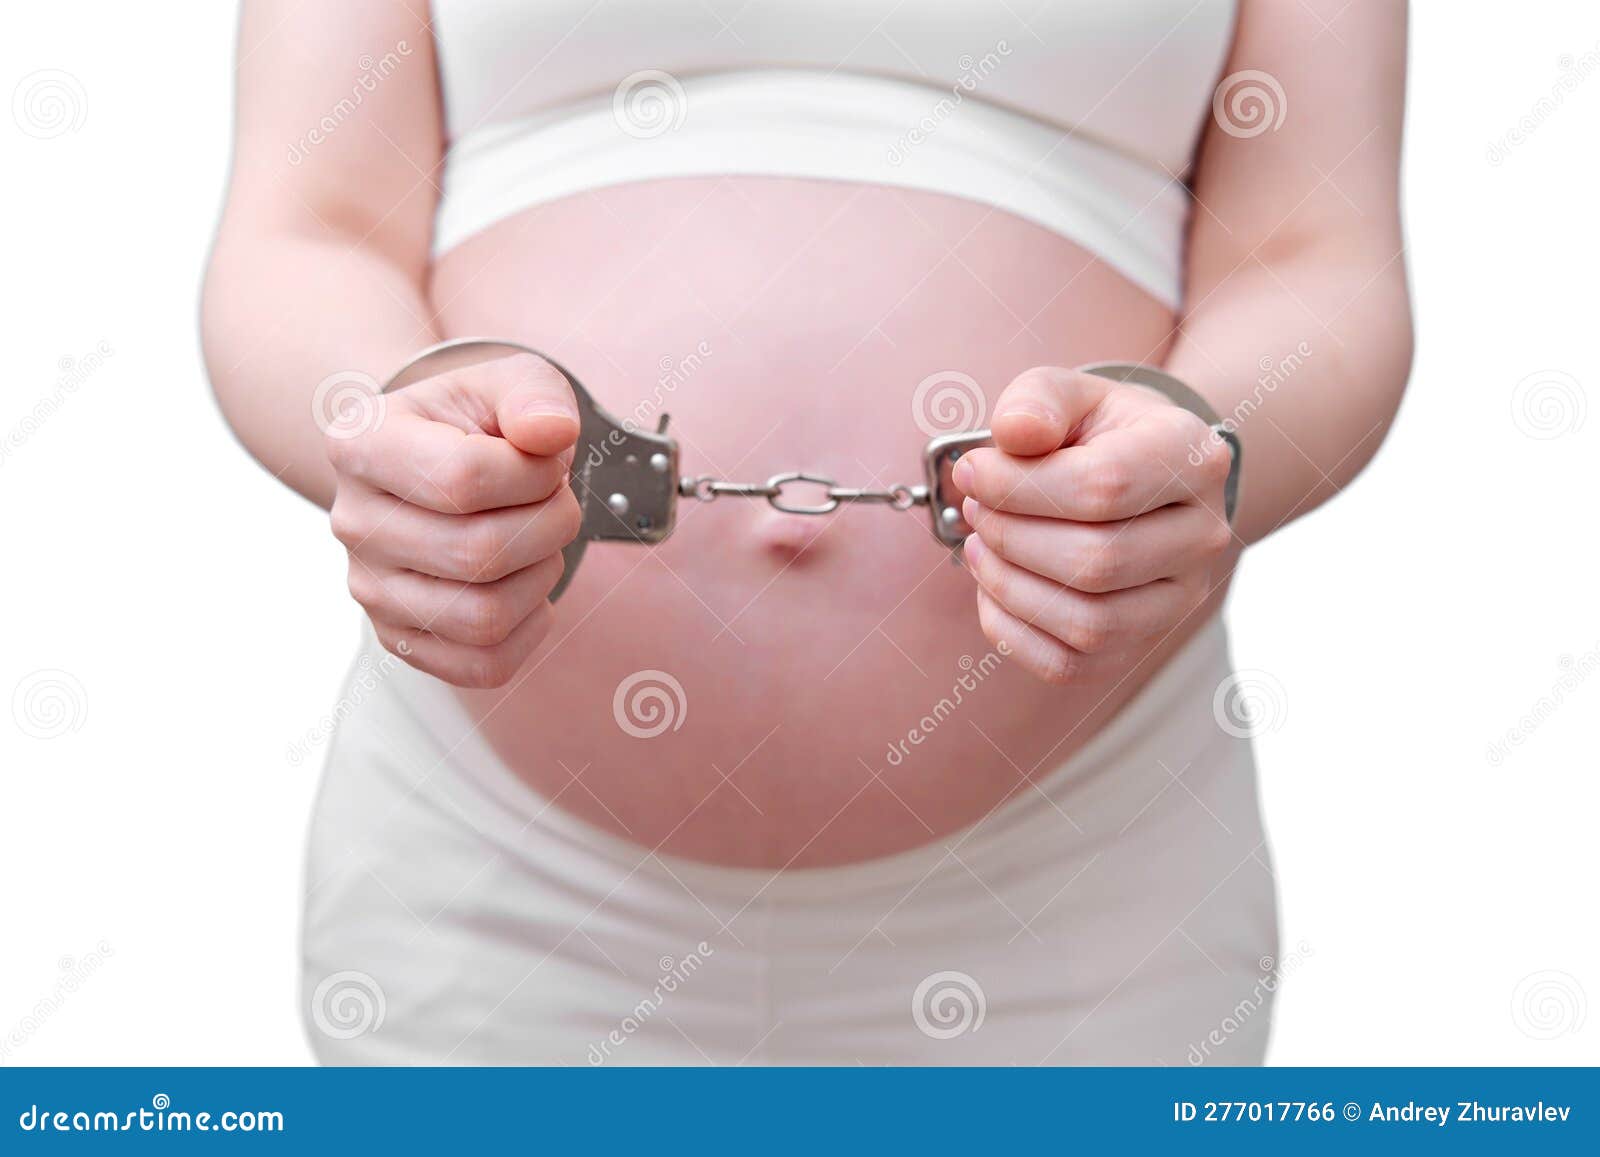 This Pregnant Woman was Legally Shackled in Chains